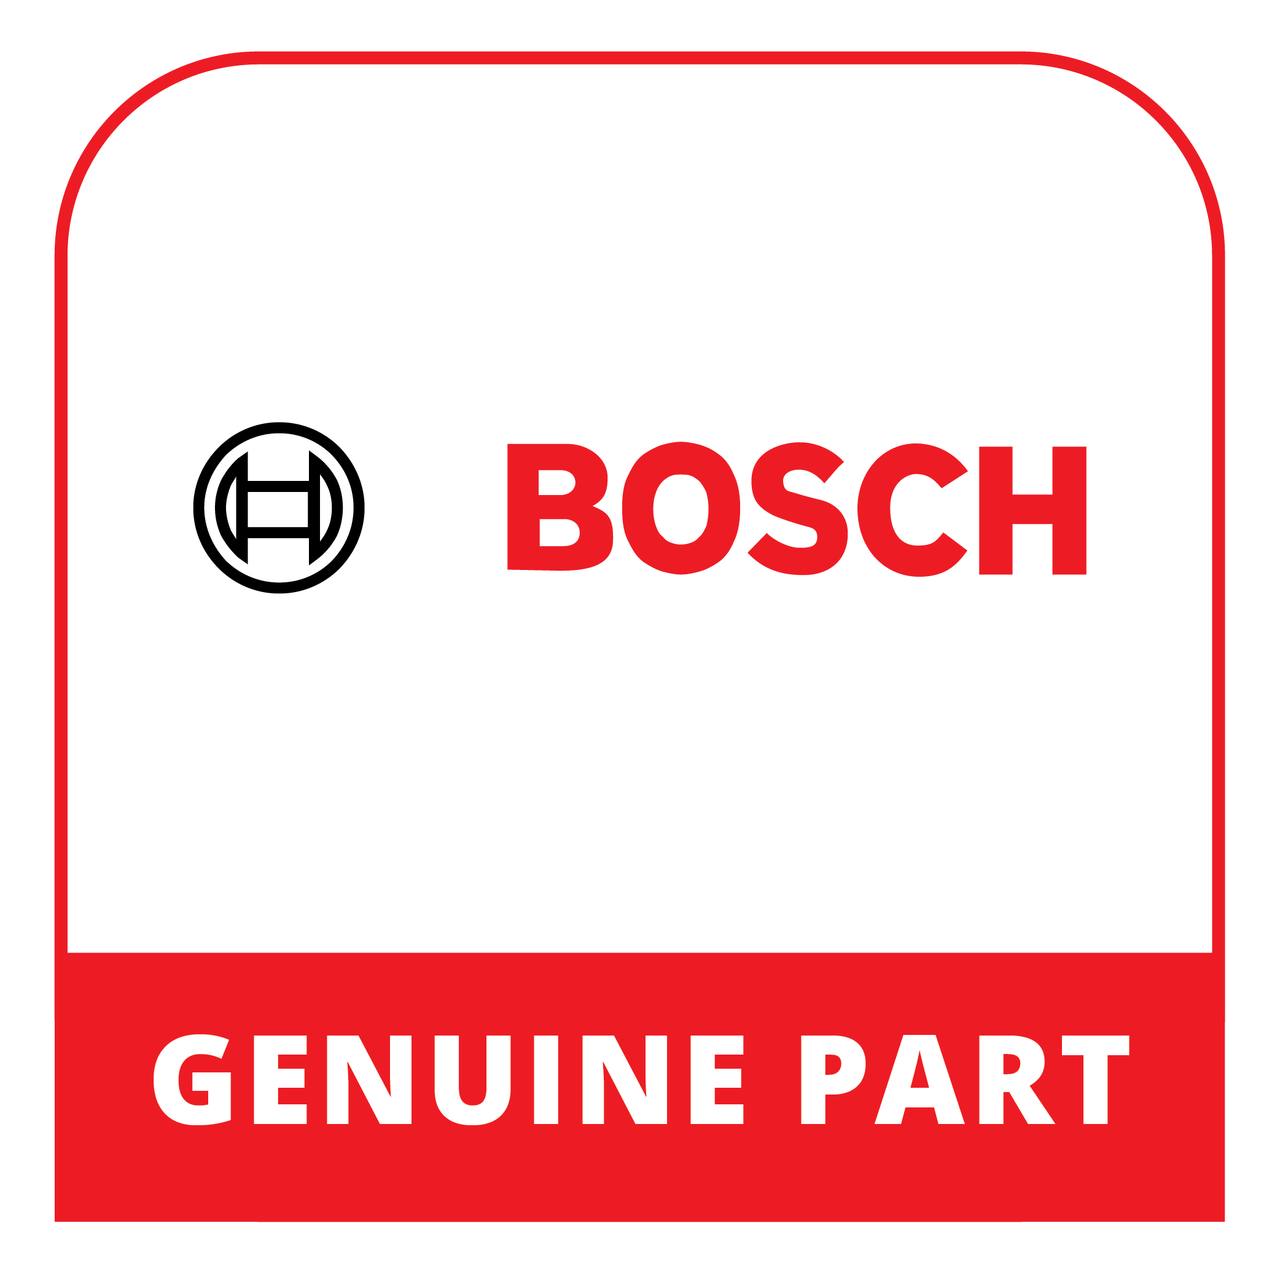 Bosch (Thermador) 12028837 - Display Module Programmed - Genuine Bosch (Thermador) Part